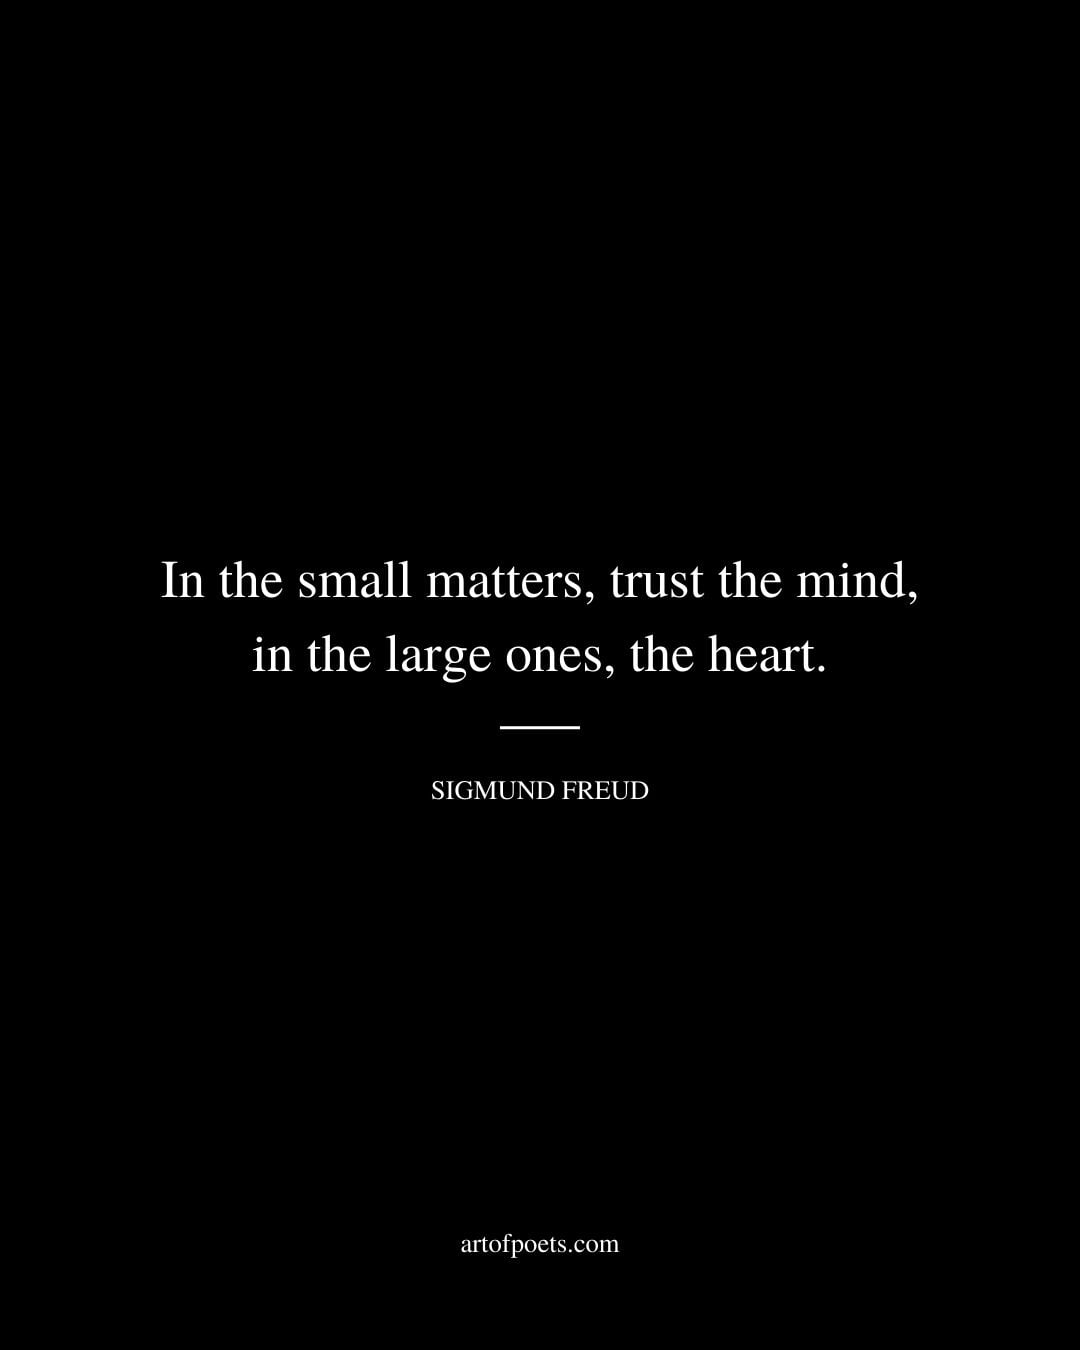 In the small matters trust the mind in the large ones the heart